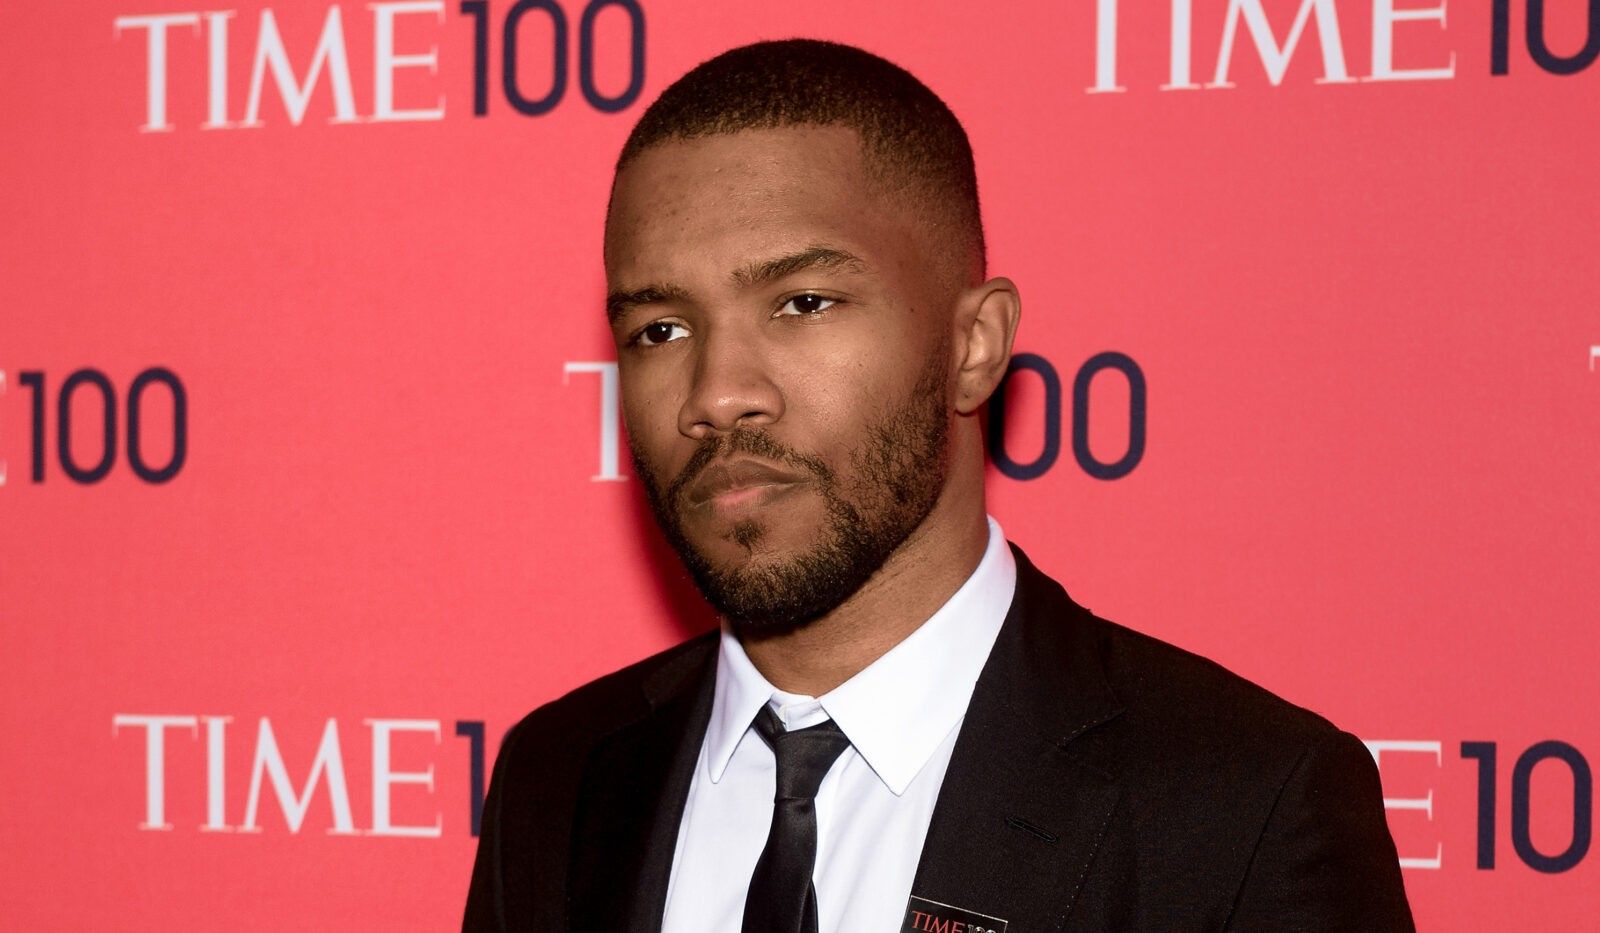 Frank Ocean Is The Face Of 2019's Biggest Trend: The High-End Euro